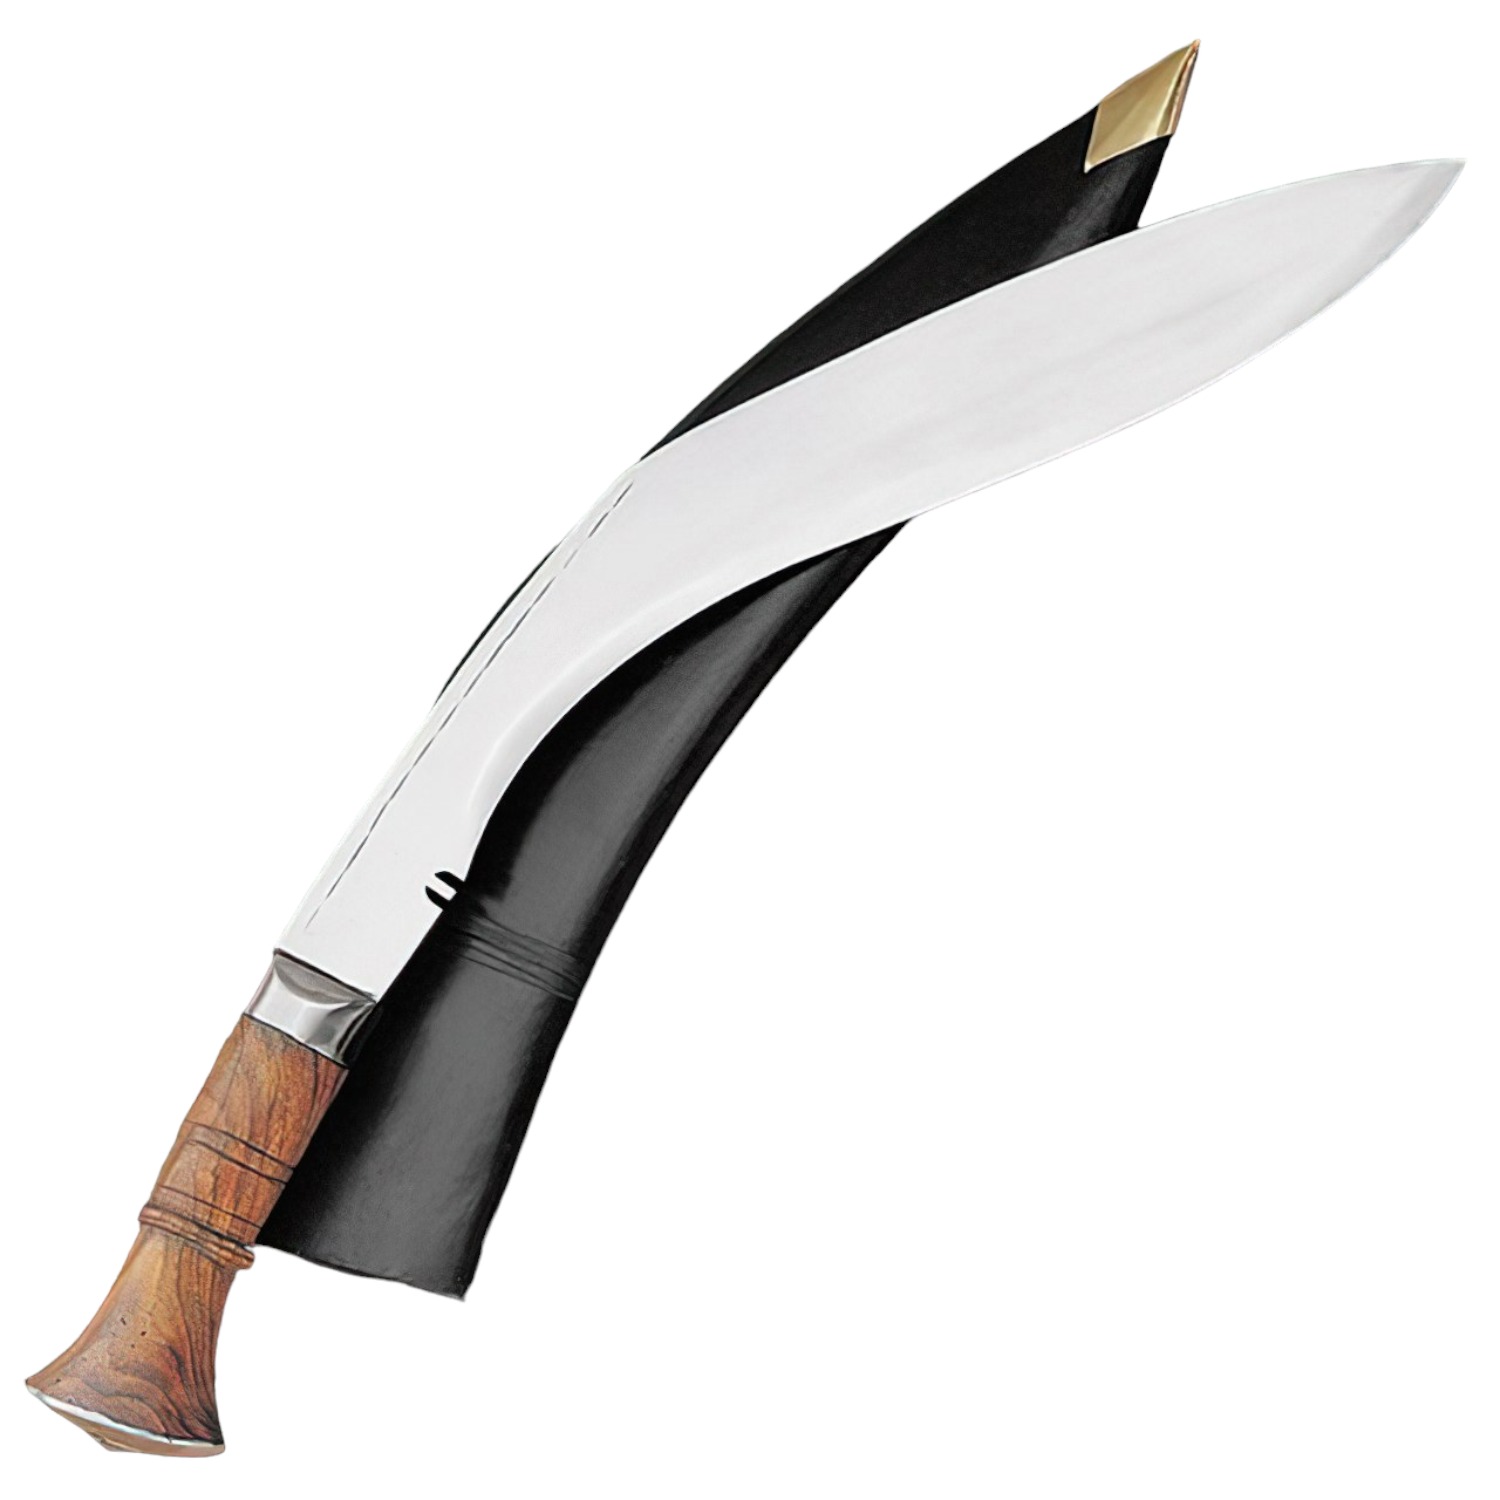 Main Gigantic Ceremonial Kukri Official Military Issue With Scabbard